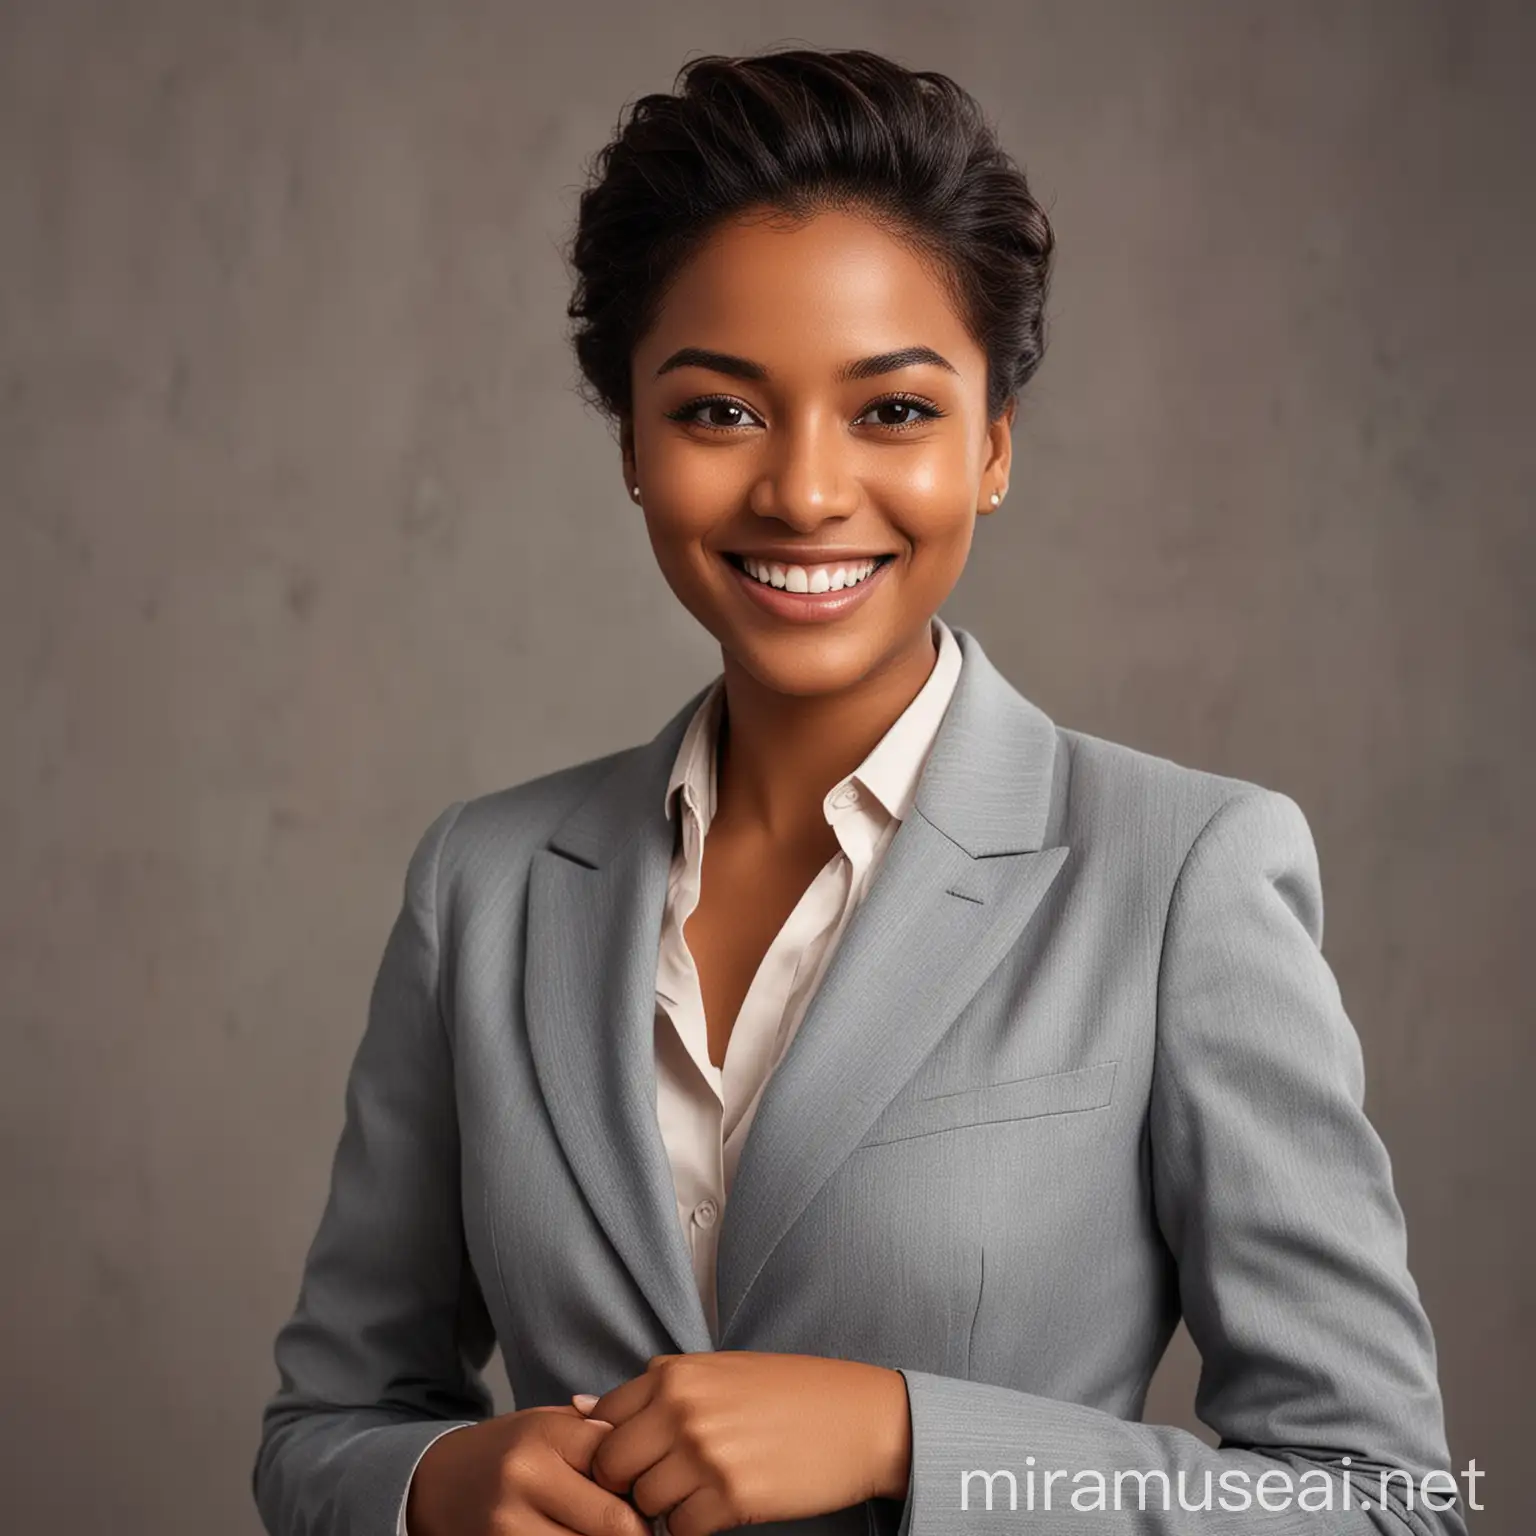 Smiling Professional Woman in Grey Suit with Brown Skin